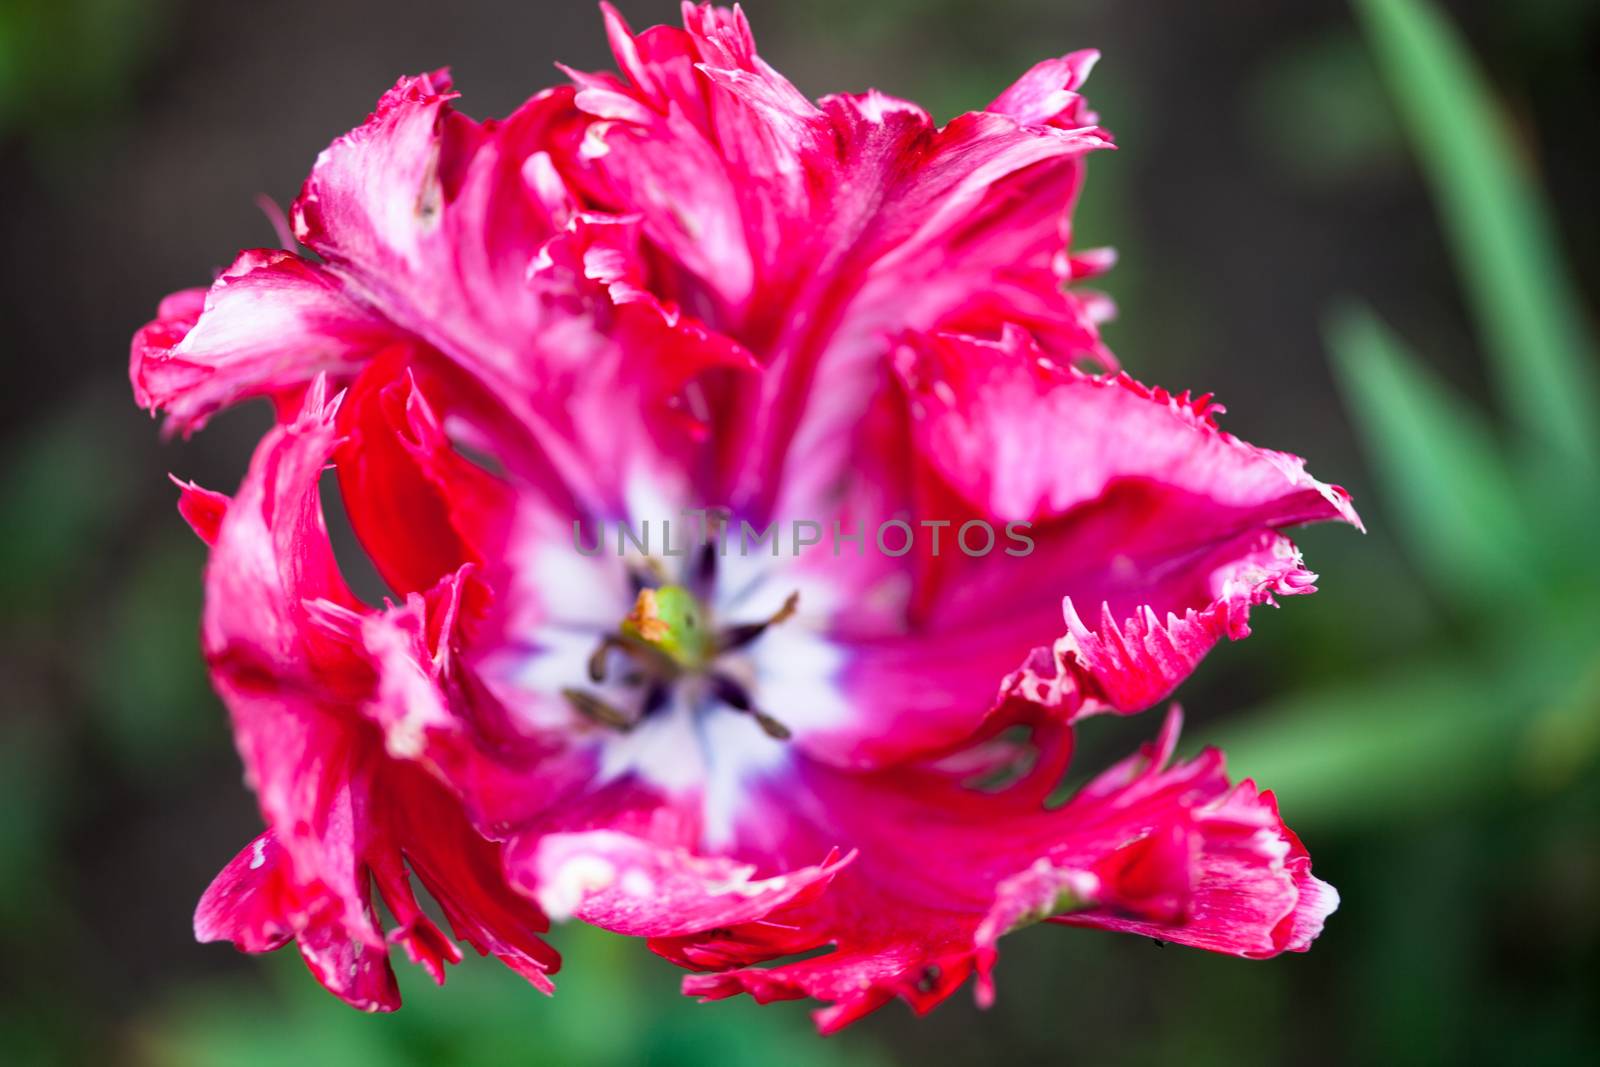 Closeup of the blooming pink tulip flower.